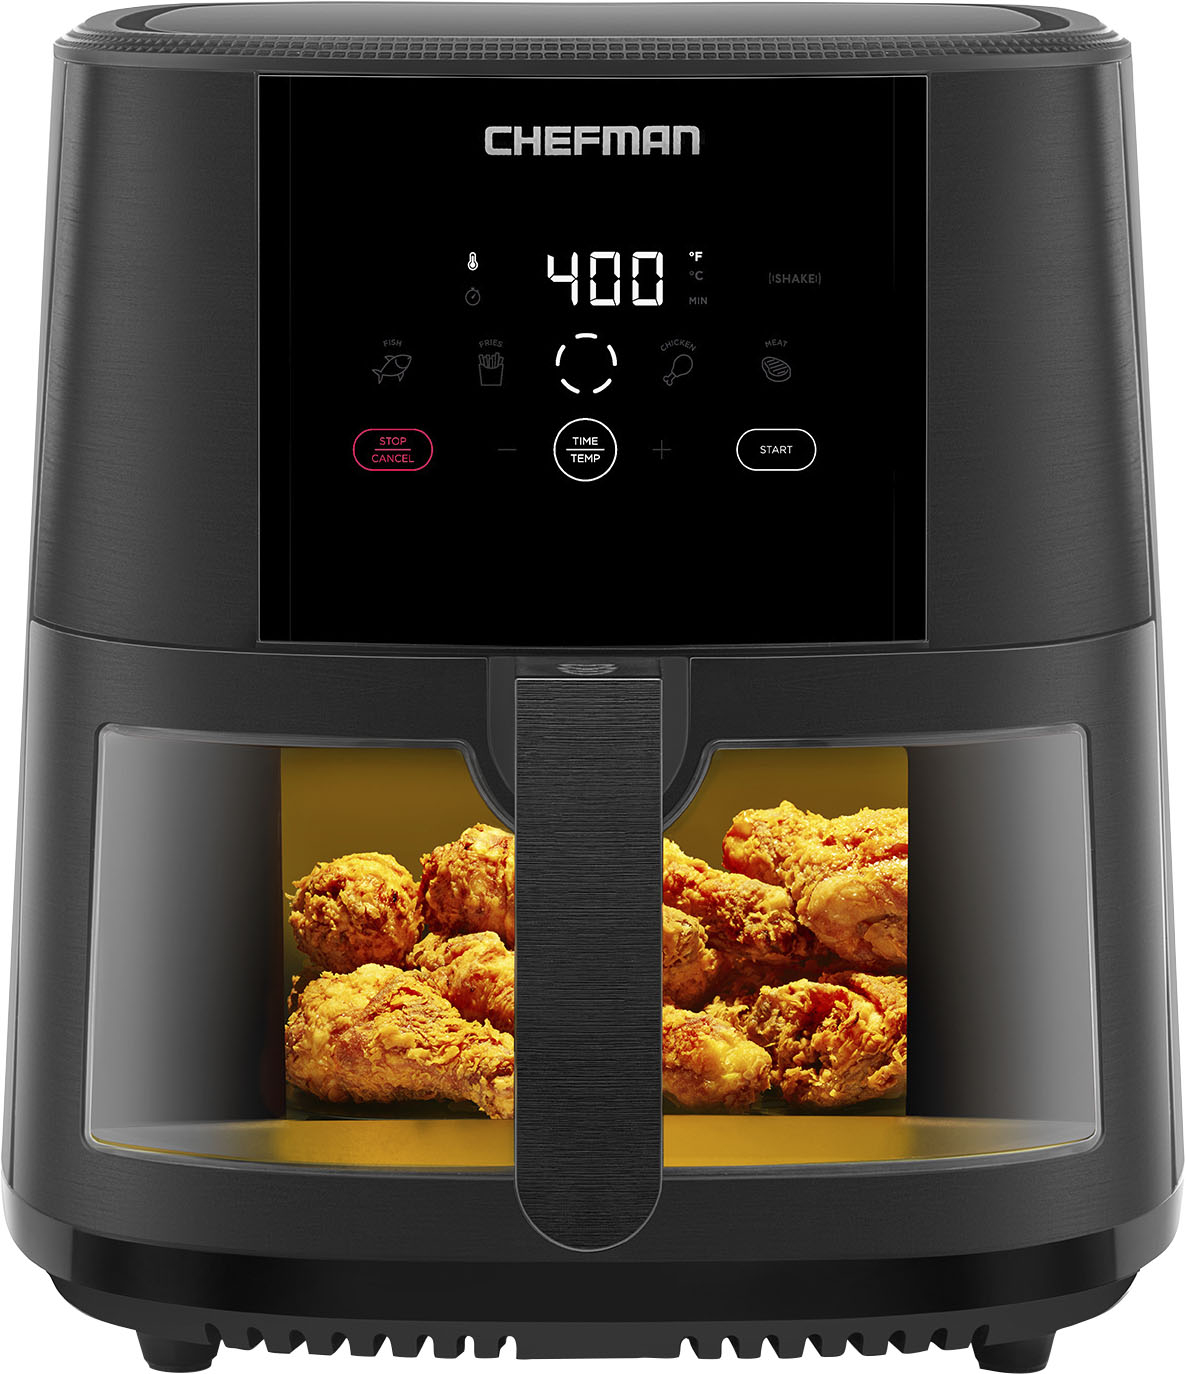 Chefman – TurboFry Touch 8 Qt Window Basket Air Fryer – Black – Just $59.99 at Best Buy